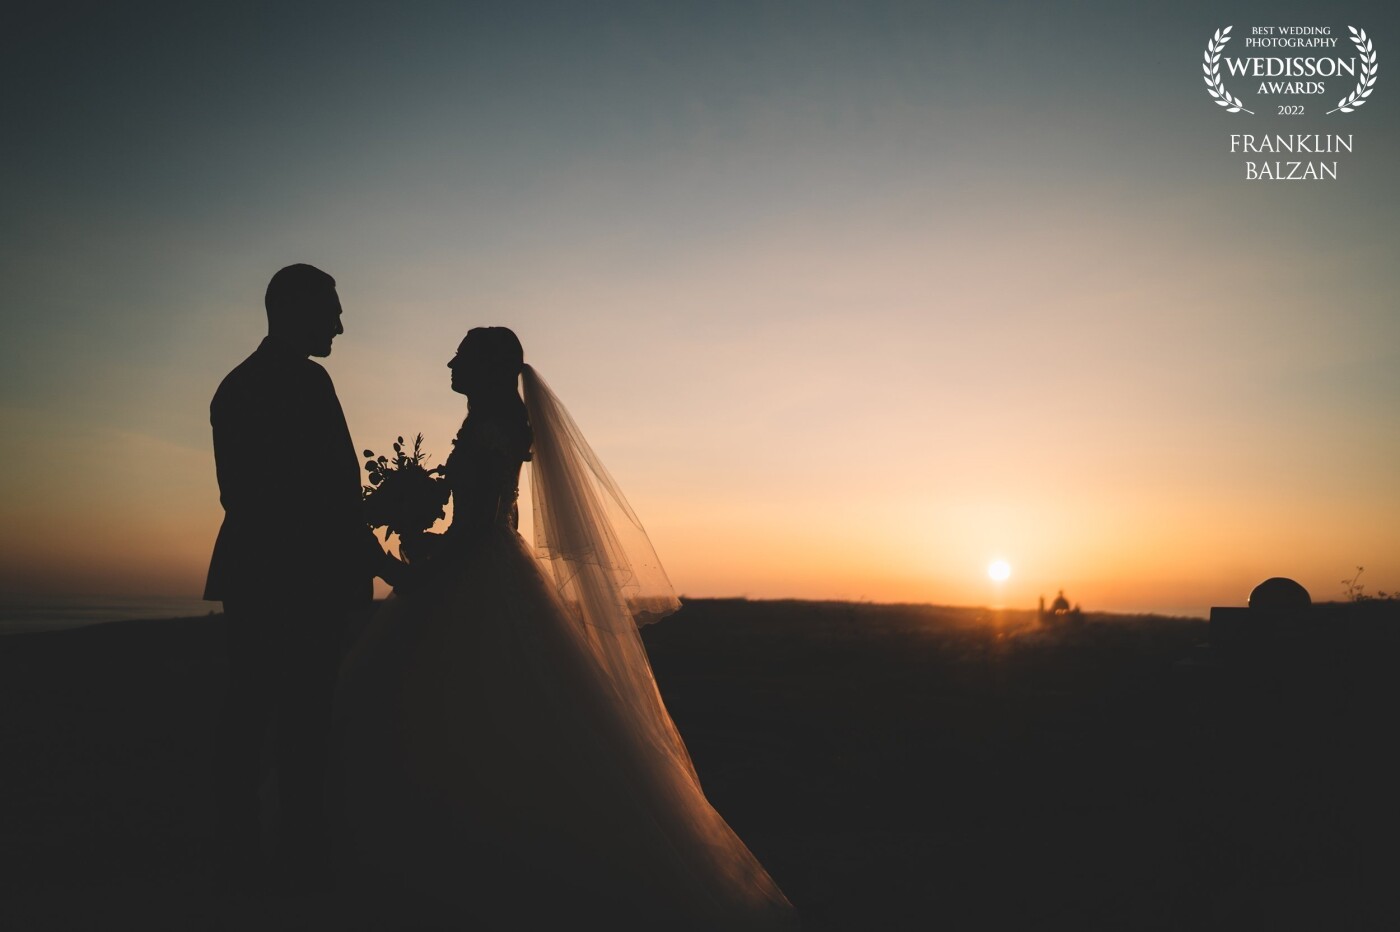 The photograph features a couple who were married on the island of Gozo, during a beautiful sunset. The setting and lighting create a romantic and striking image, with the couple's silhouettes standing out against the glowing sunset in the background. The photograph may have been taken just after the wedding ceremony, adding to the sentimental value of the image.